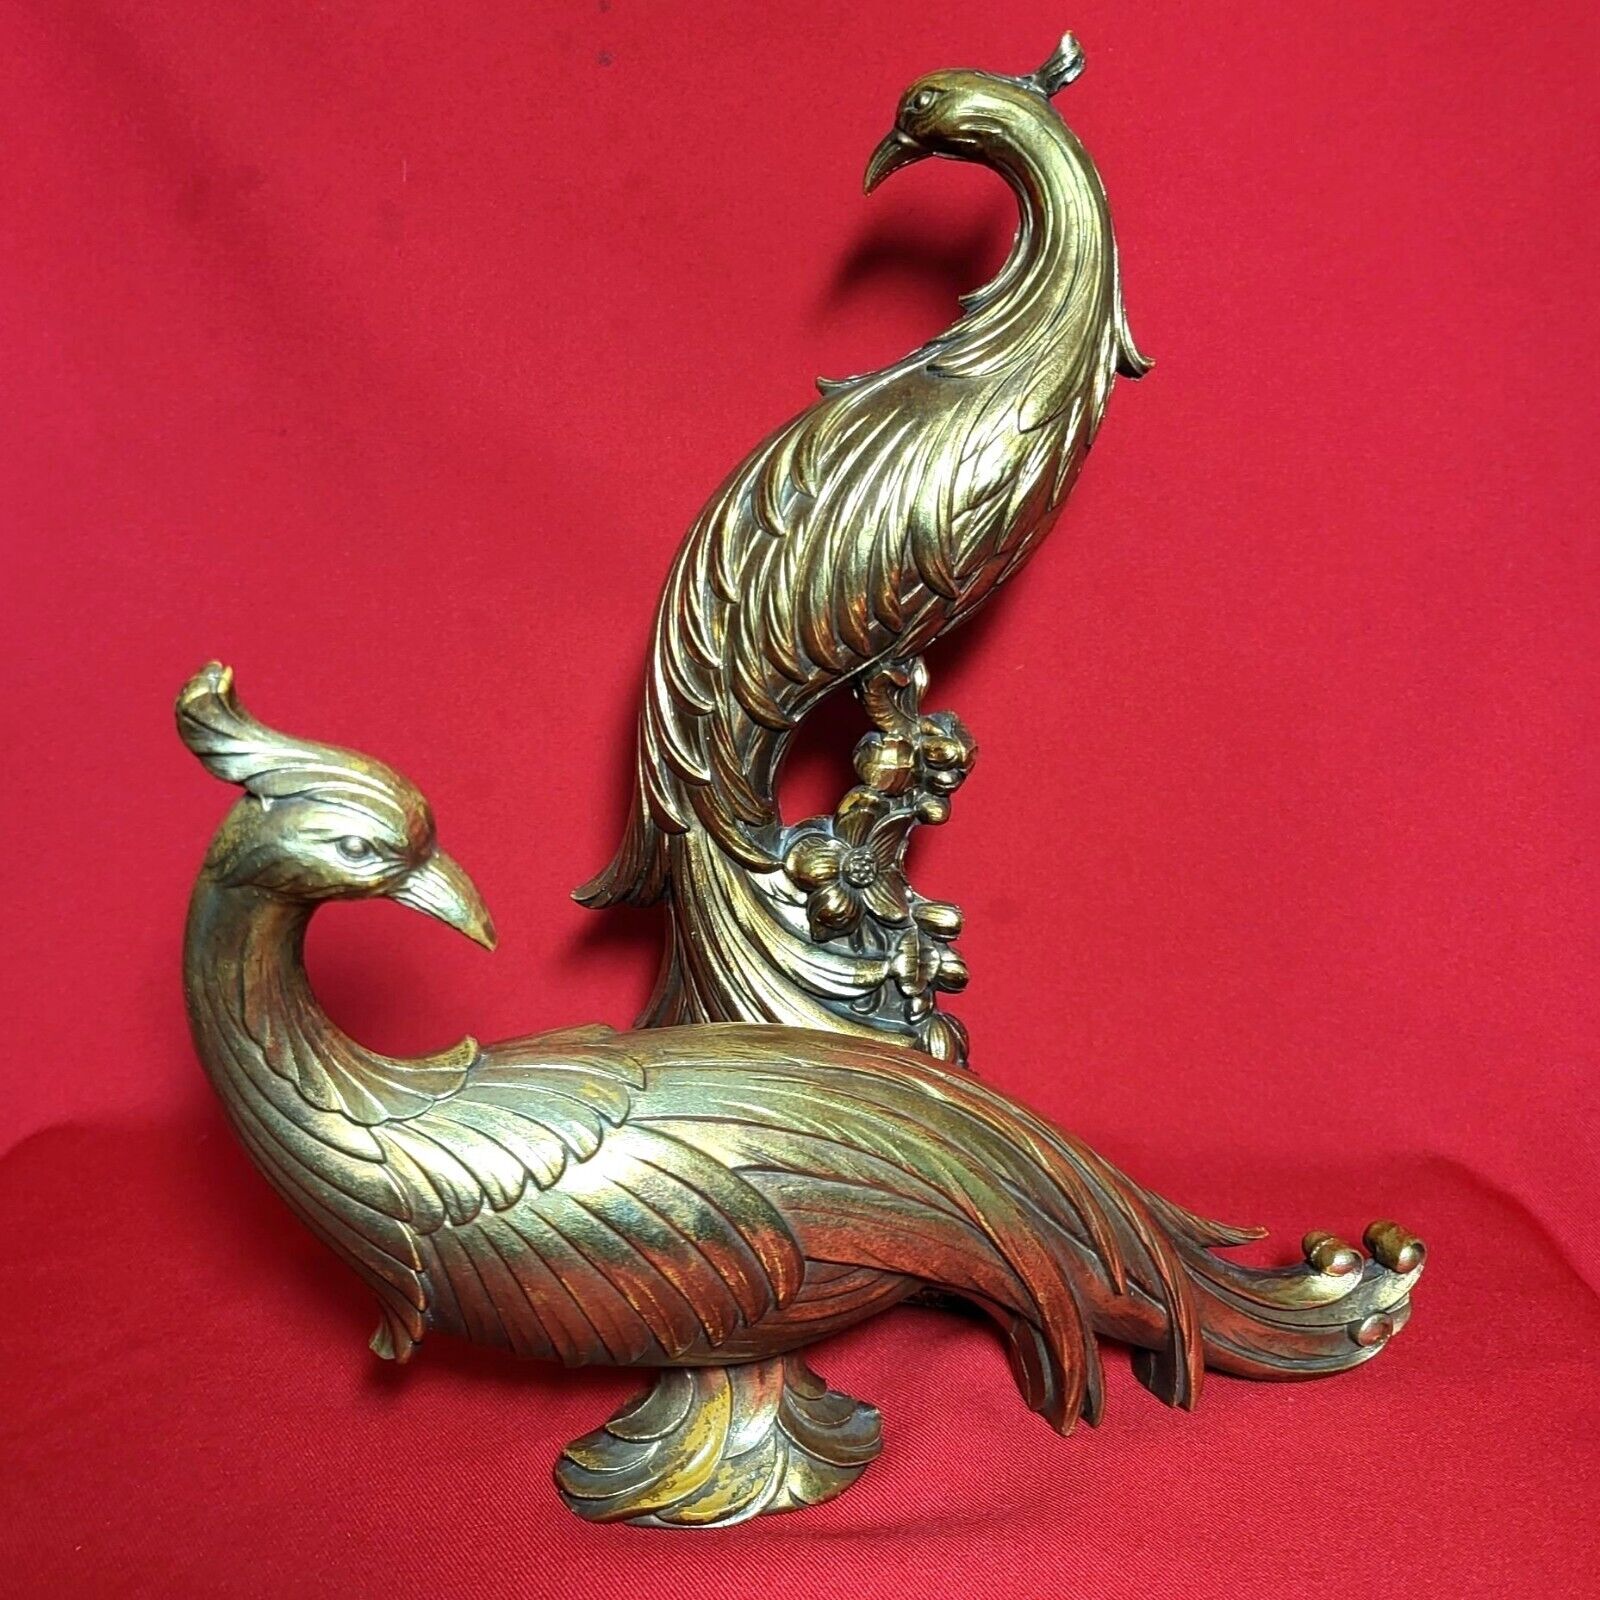 Vintage Syraco Gold Toned Pheasant Peacock Figurines Pair of Table Statuettes